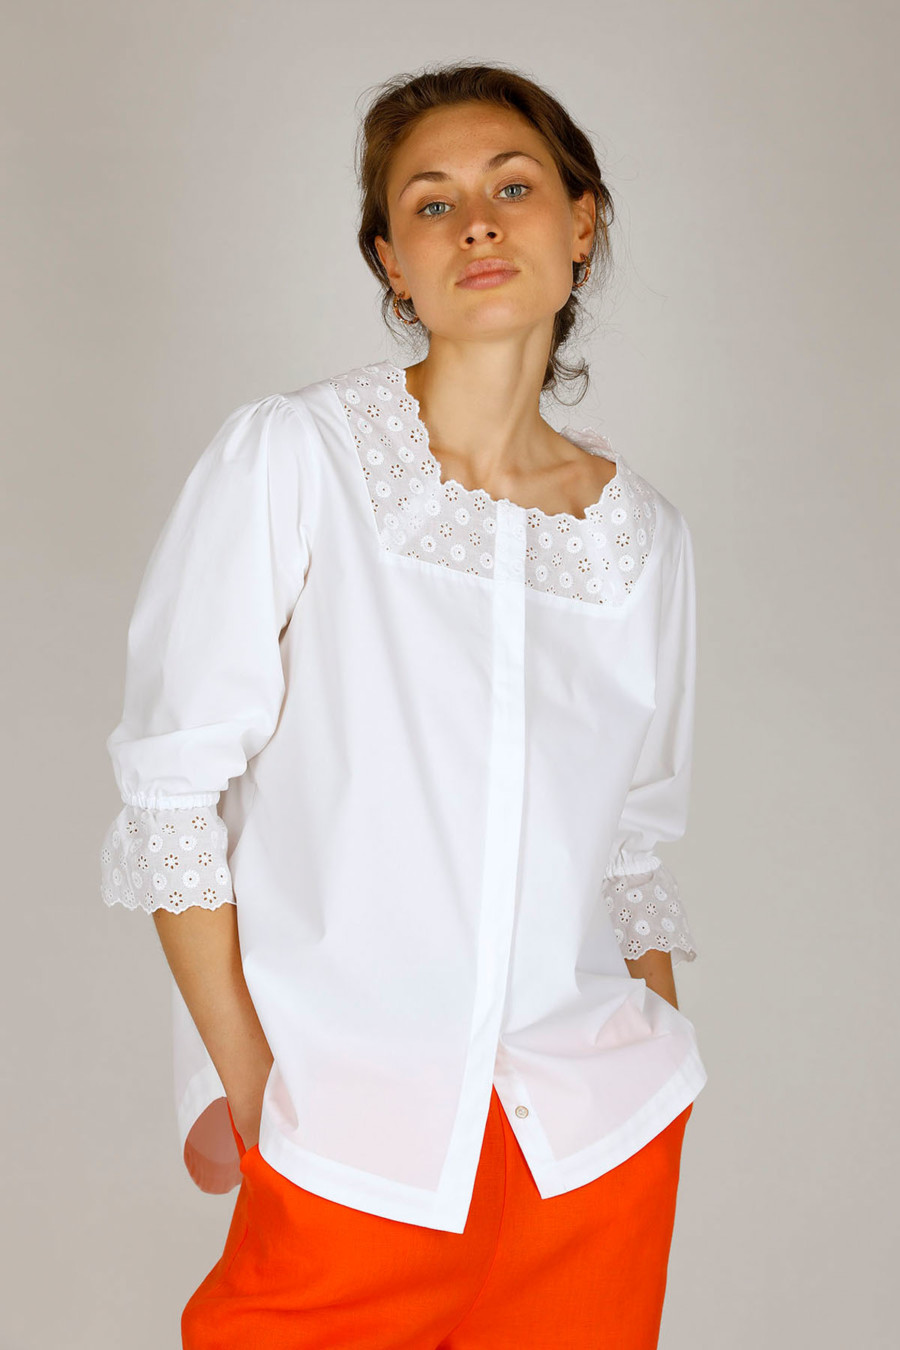 HOLLY - Romantic lace blouse with carree neckline - Colour: White